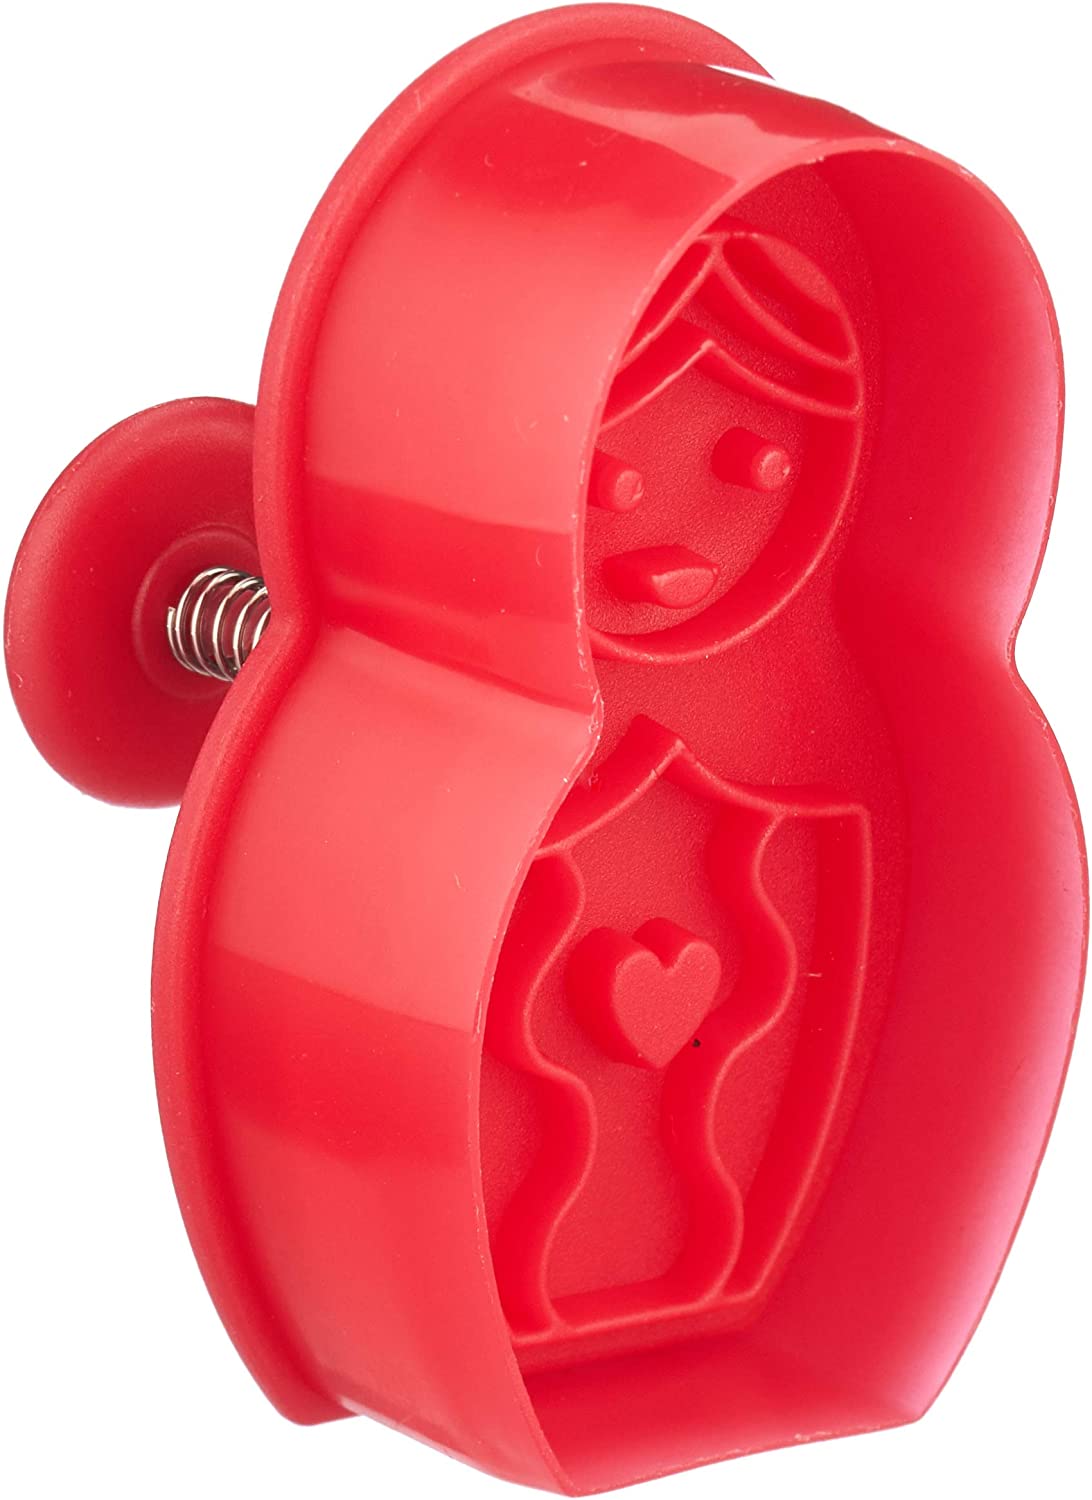 Staedter Städter ST170957 Russian Doll Cookie Cutter with Ejector Red Approximately 6 cm